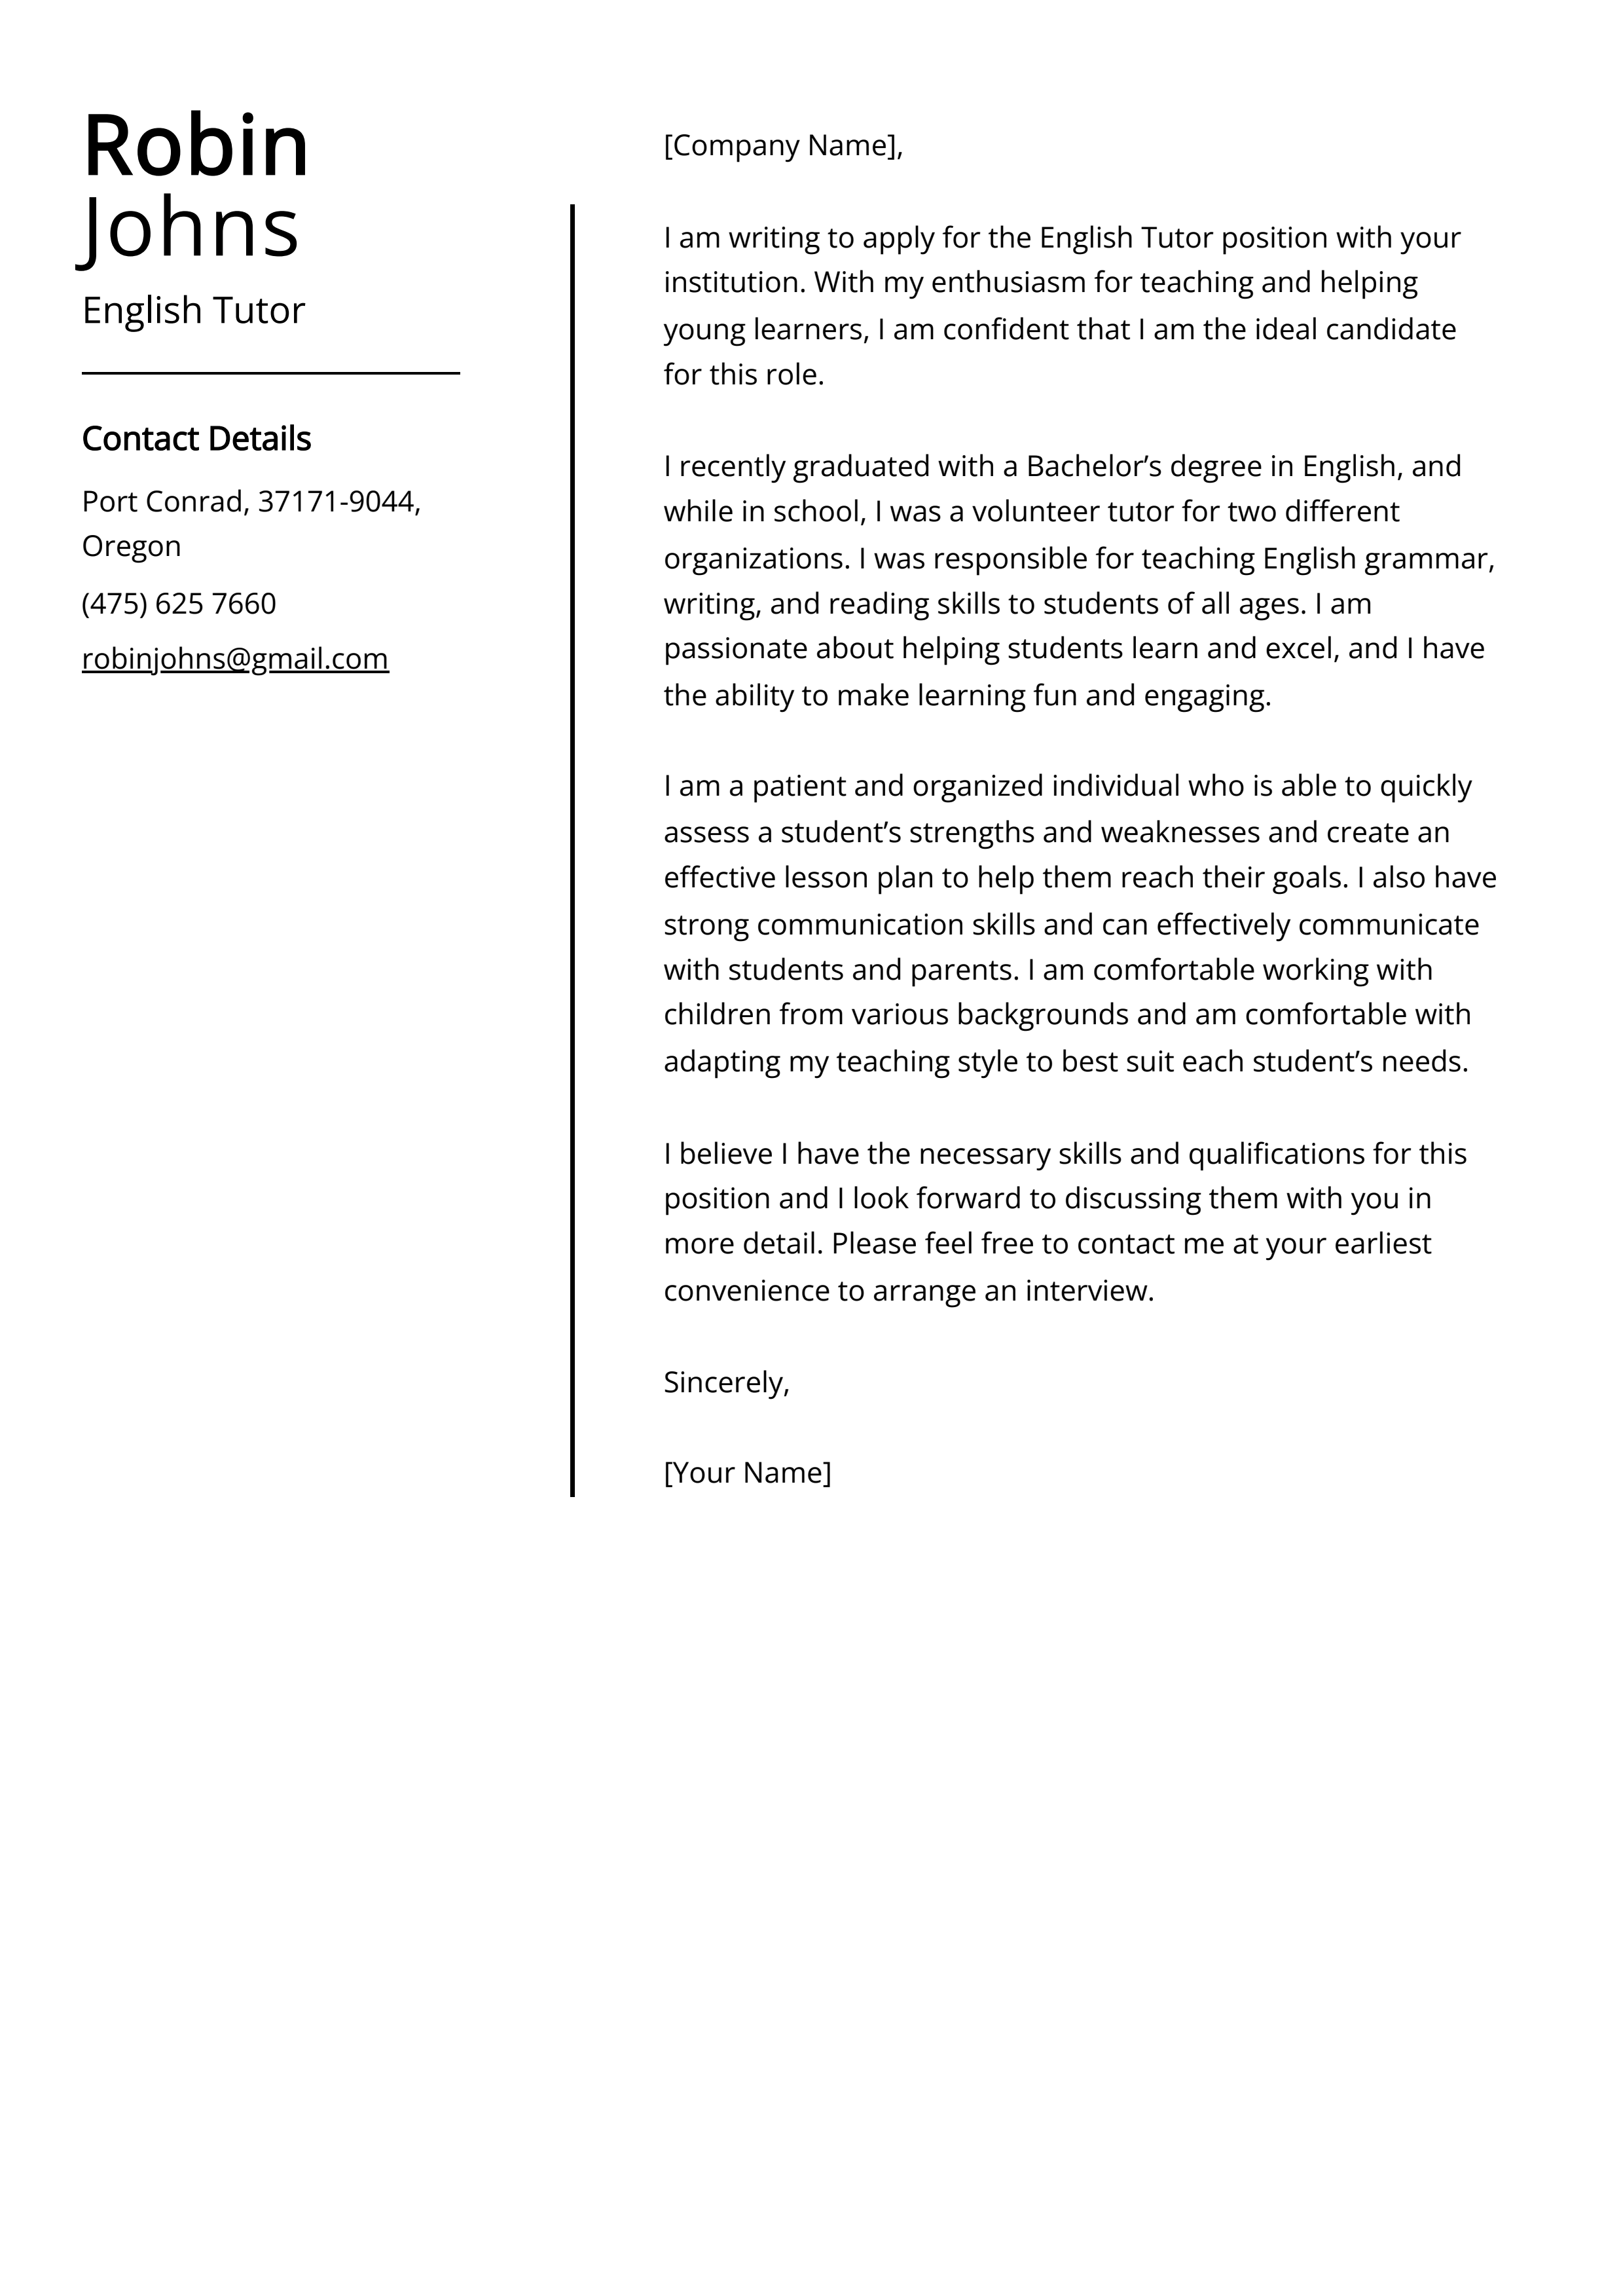 English Tutor Cover Letter Example